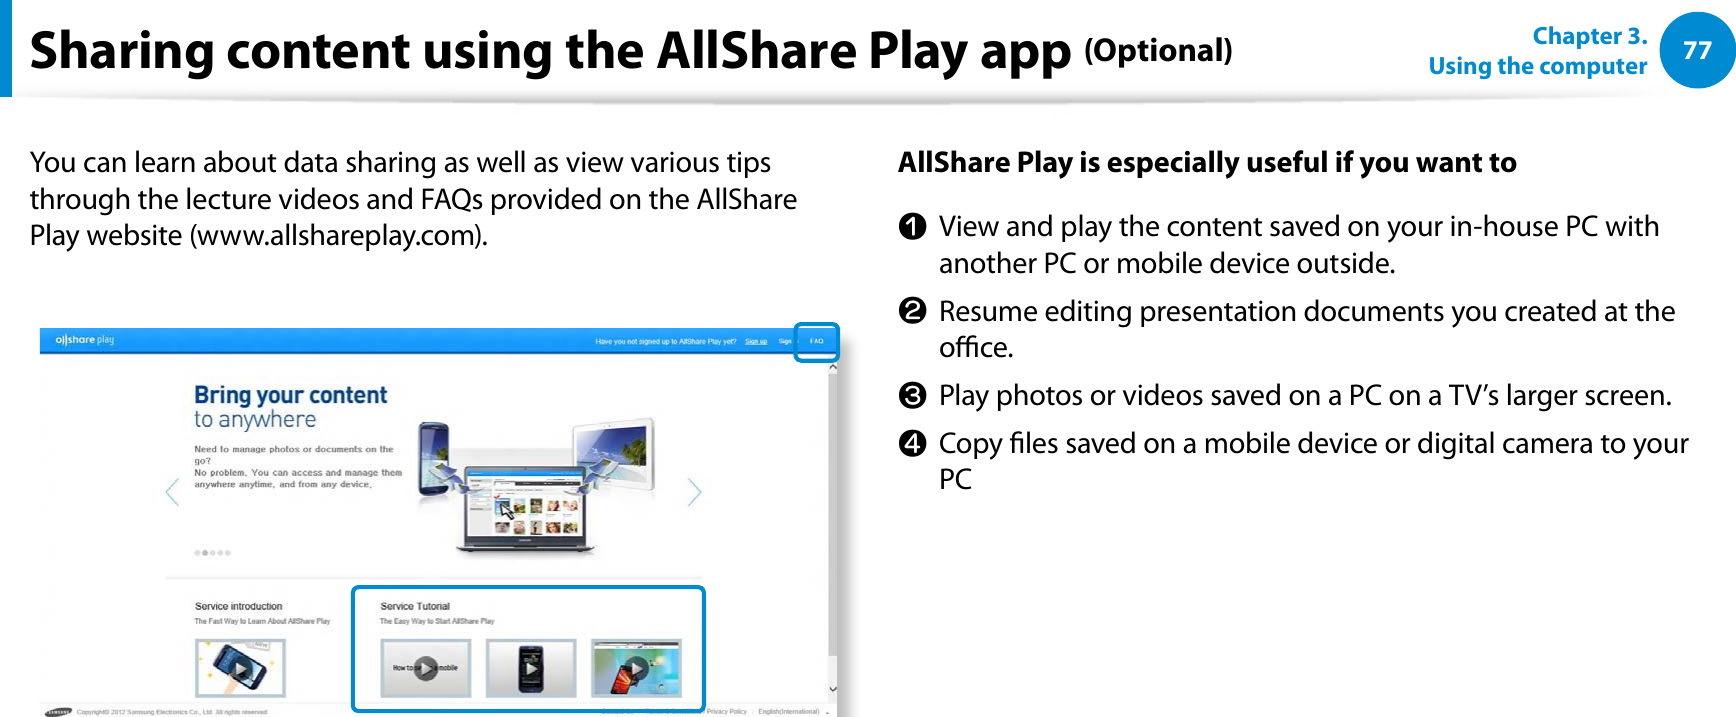 77Chapter 3.  Using the computerSharing content using the AllShare Play app (Optional)You can learn about data sharing as well as view various tips through the lecture videos and FAQs provided on the AllShare Play website (www.allshareplay.com).AllShare Play is especially useful if you want ton  View and play the content saved on your in-house PC with another PC or mobile device outside.l  Resume editing presentation documents you created at the oce.W  Play photos or videos saved on a PC on a TV’s larger screen.j  Copy les saved on a mobile device or digital camera to your PC